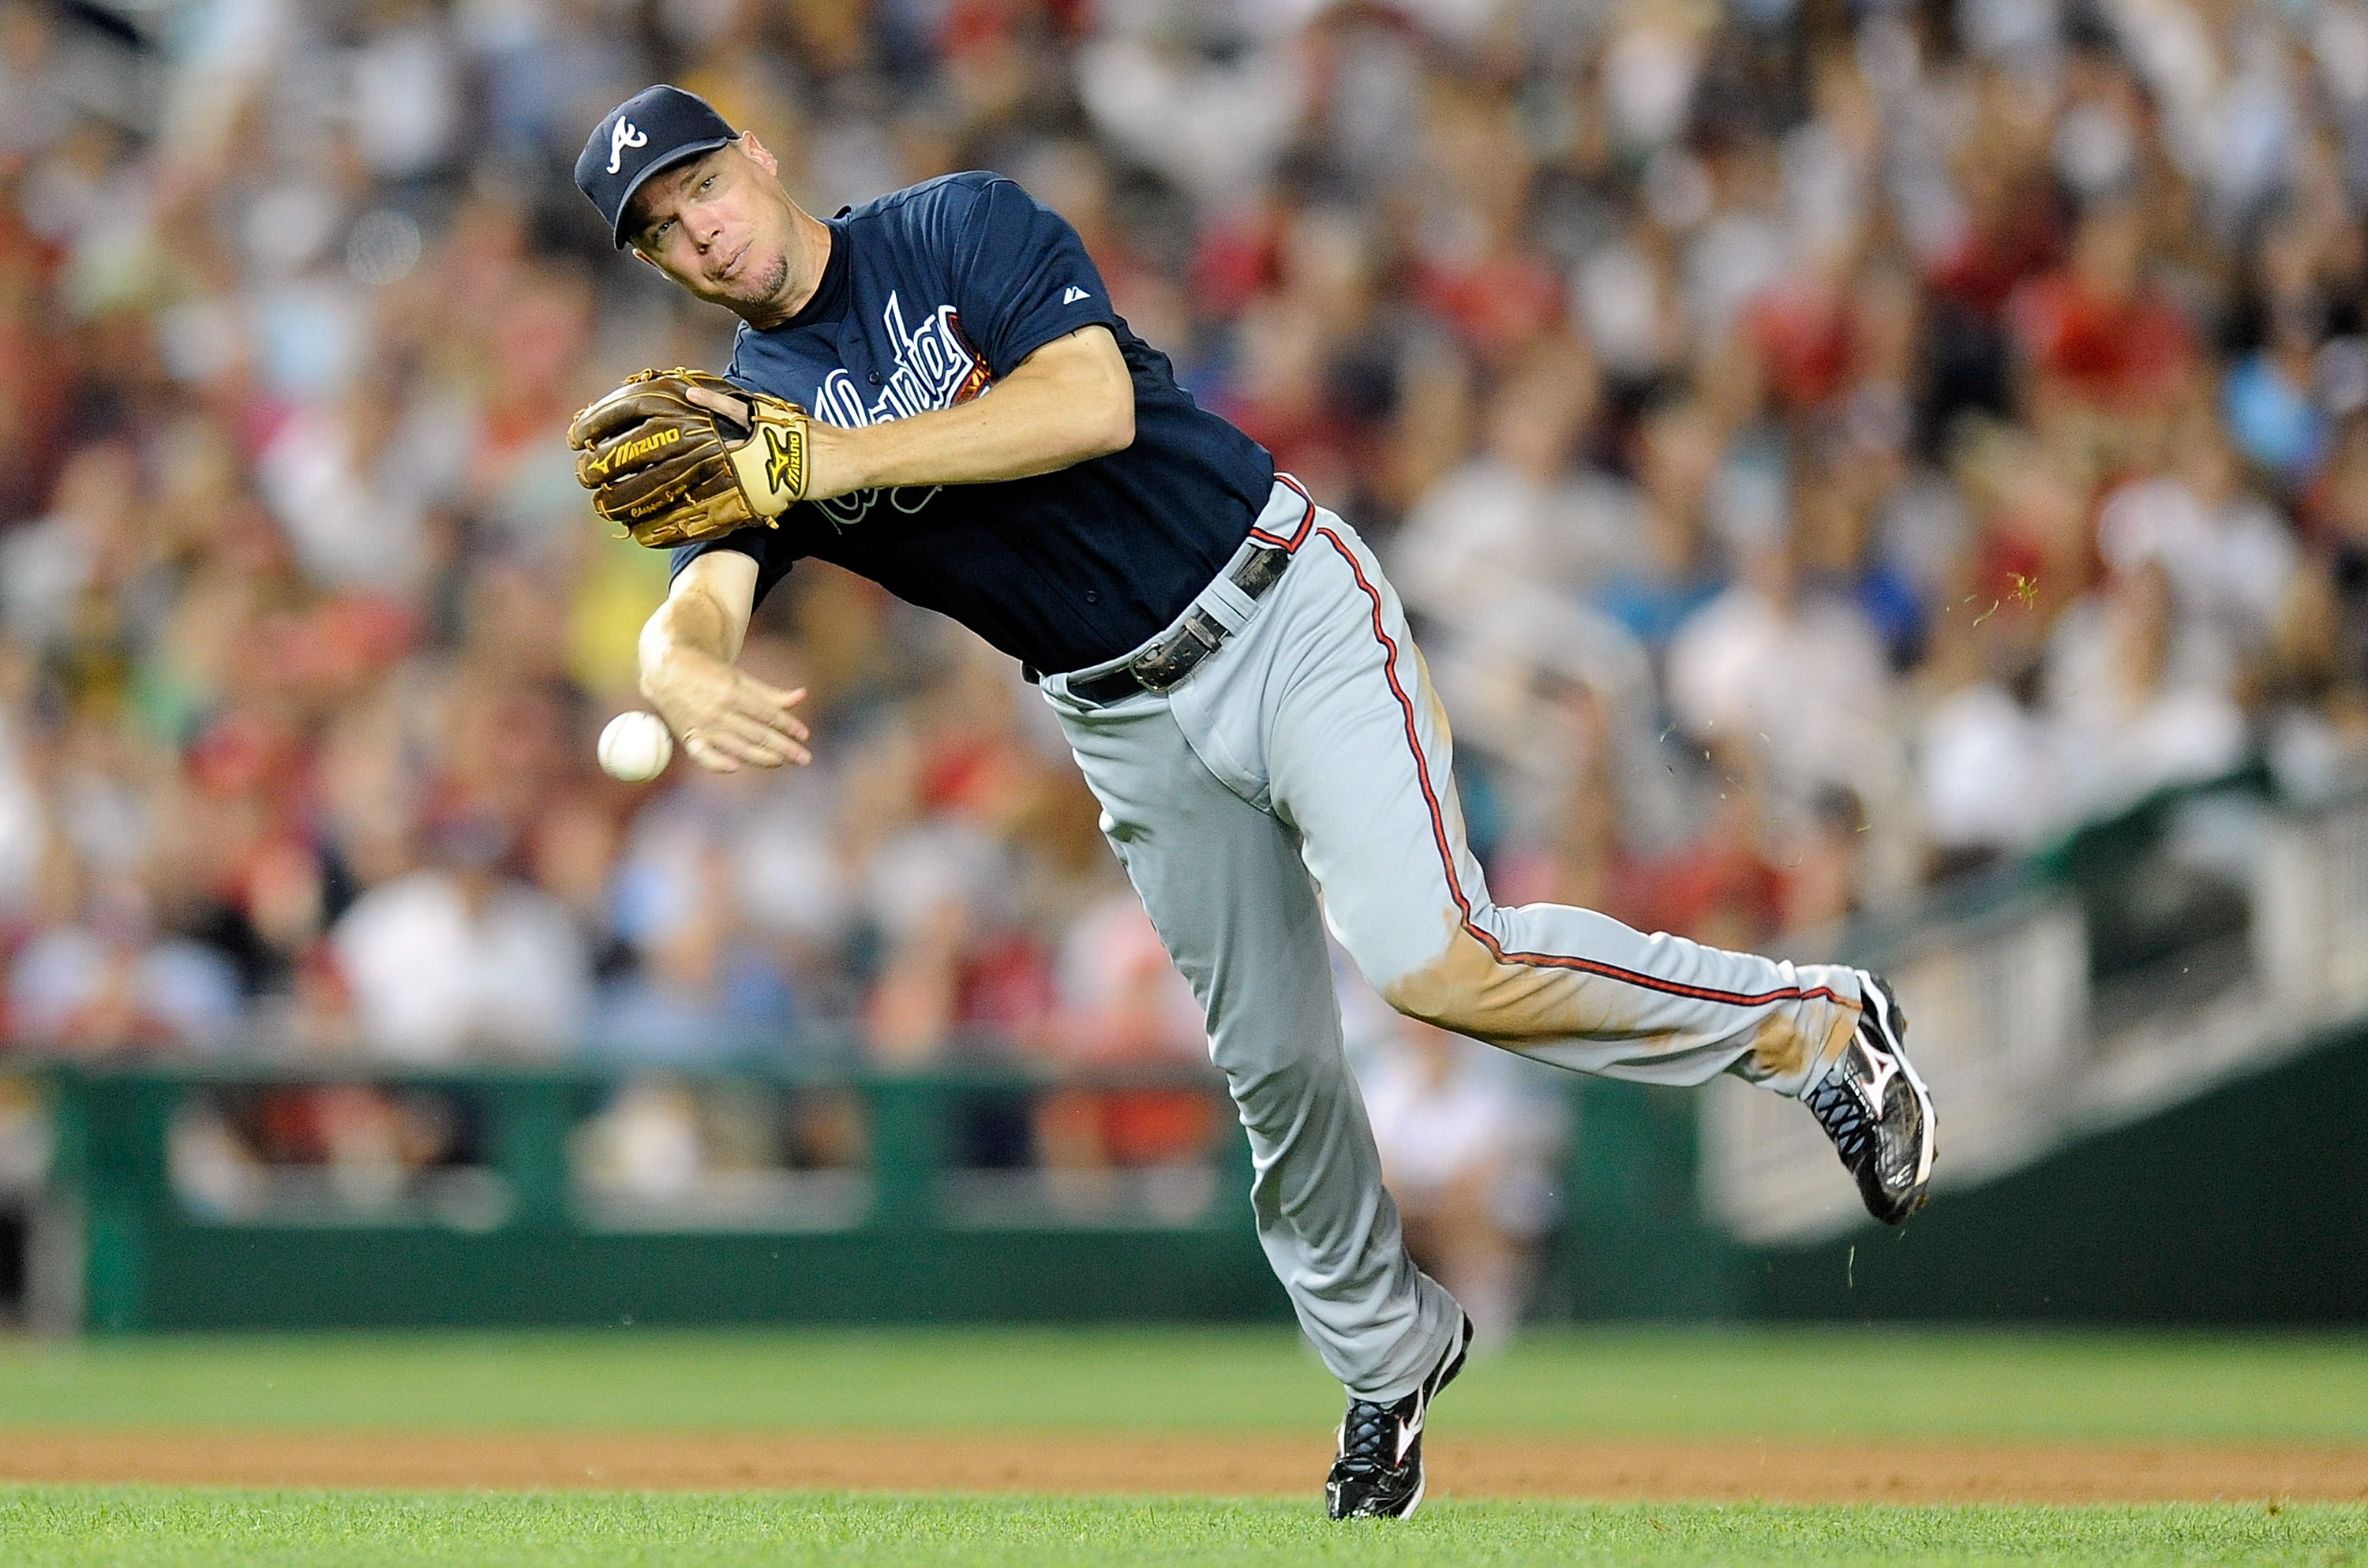 WASHINGTON - JULY 27:  Chipper Jones #10 of the Atlanta Braves throws the ball to first base against the Washington Nationals at Nationals Park on July 27, 2010 in Washington, DC.  (Photo by Greg Fiume/Getty Images)